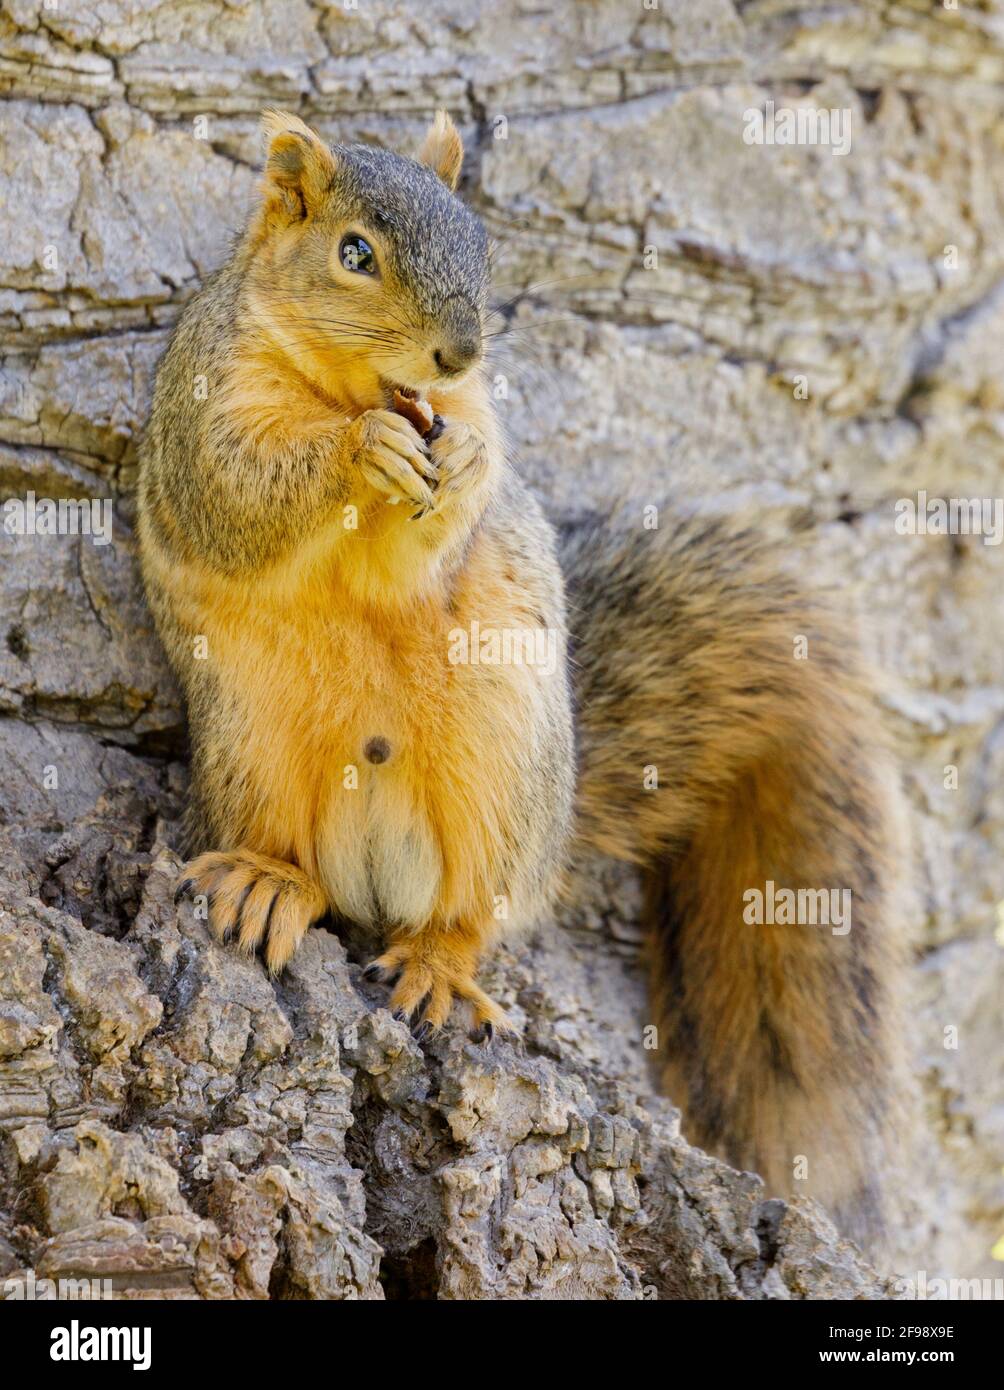 Eastern Gray Squirrel standing on its hind legs and snacking. Santa Clara County, California, USA. Stock Photo